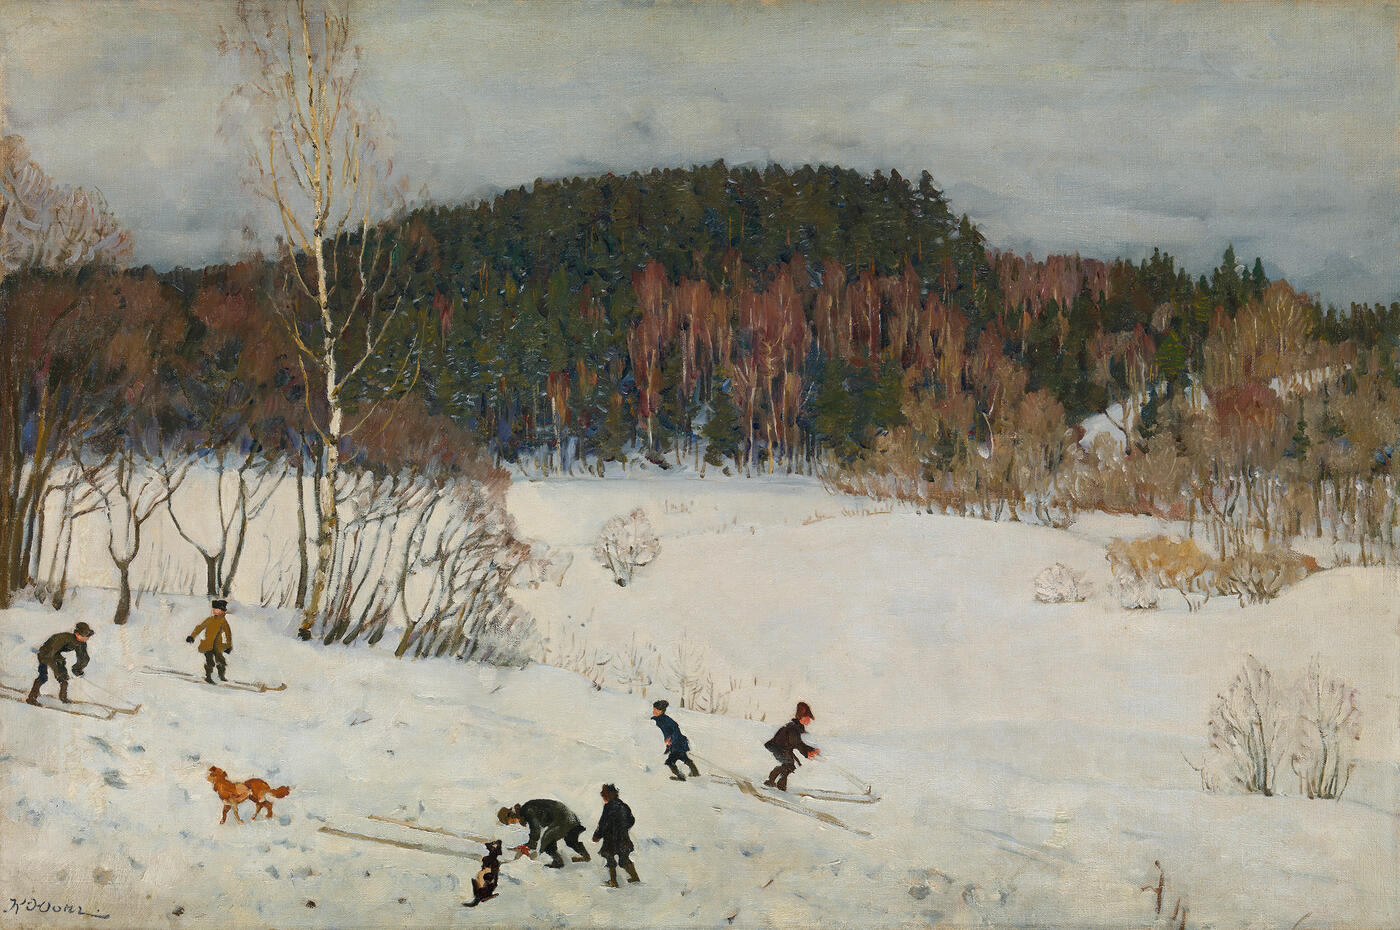 Landscape with Skiers